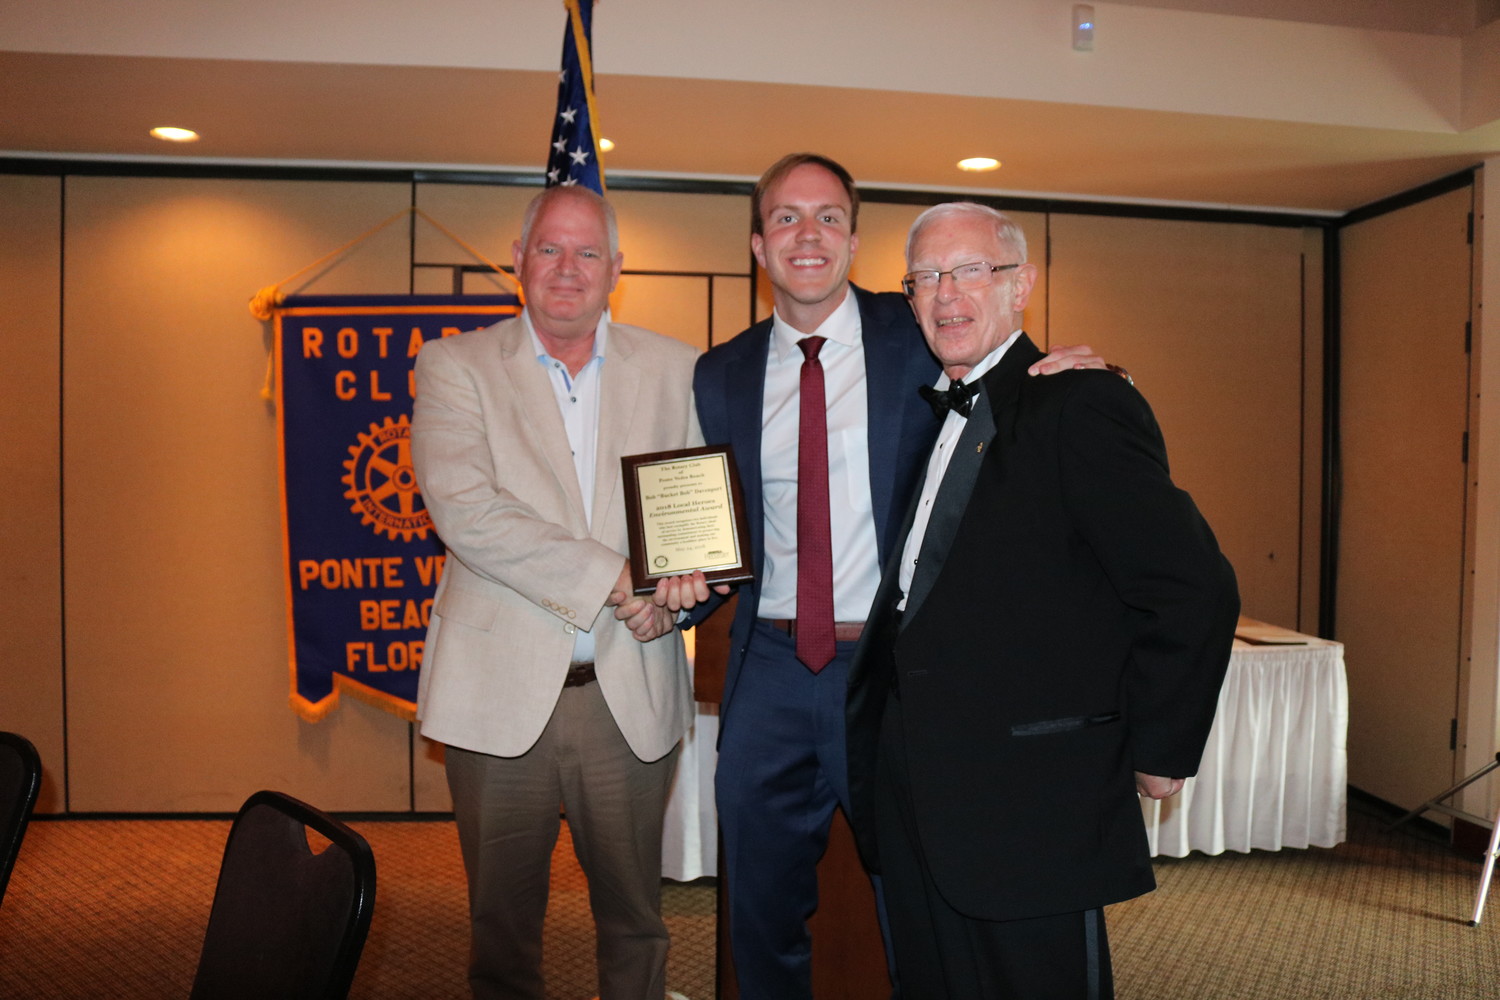 “Bucket” Bob Davenport (left) receives the Environmental Award from Ponte Vedra Recorder Editor Jon Blauvelt (center) and Rotarian Chuck Day (right) at the Local Heroes Awards on May 24.